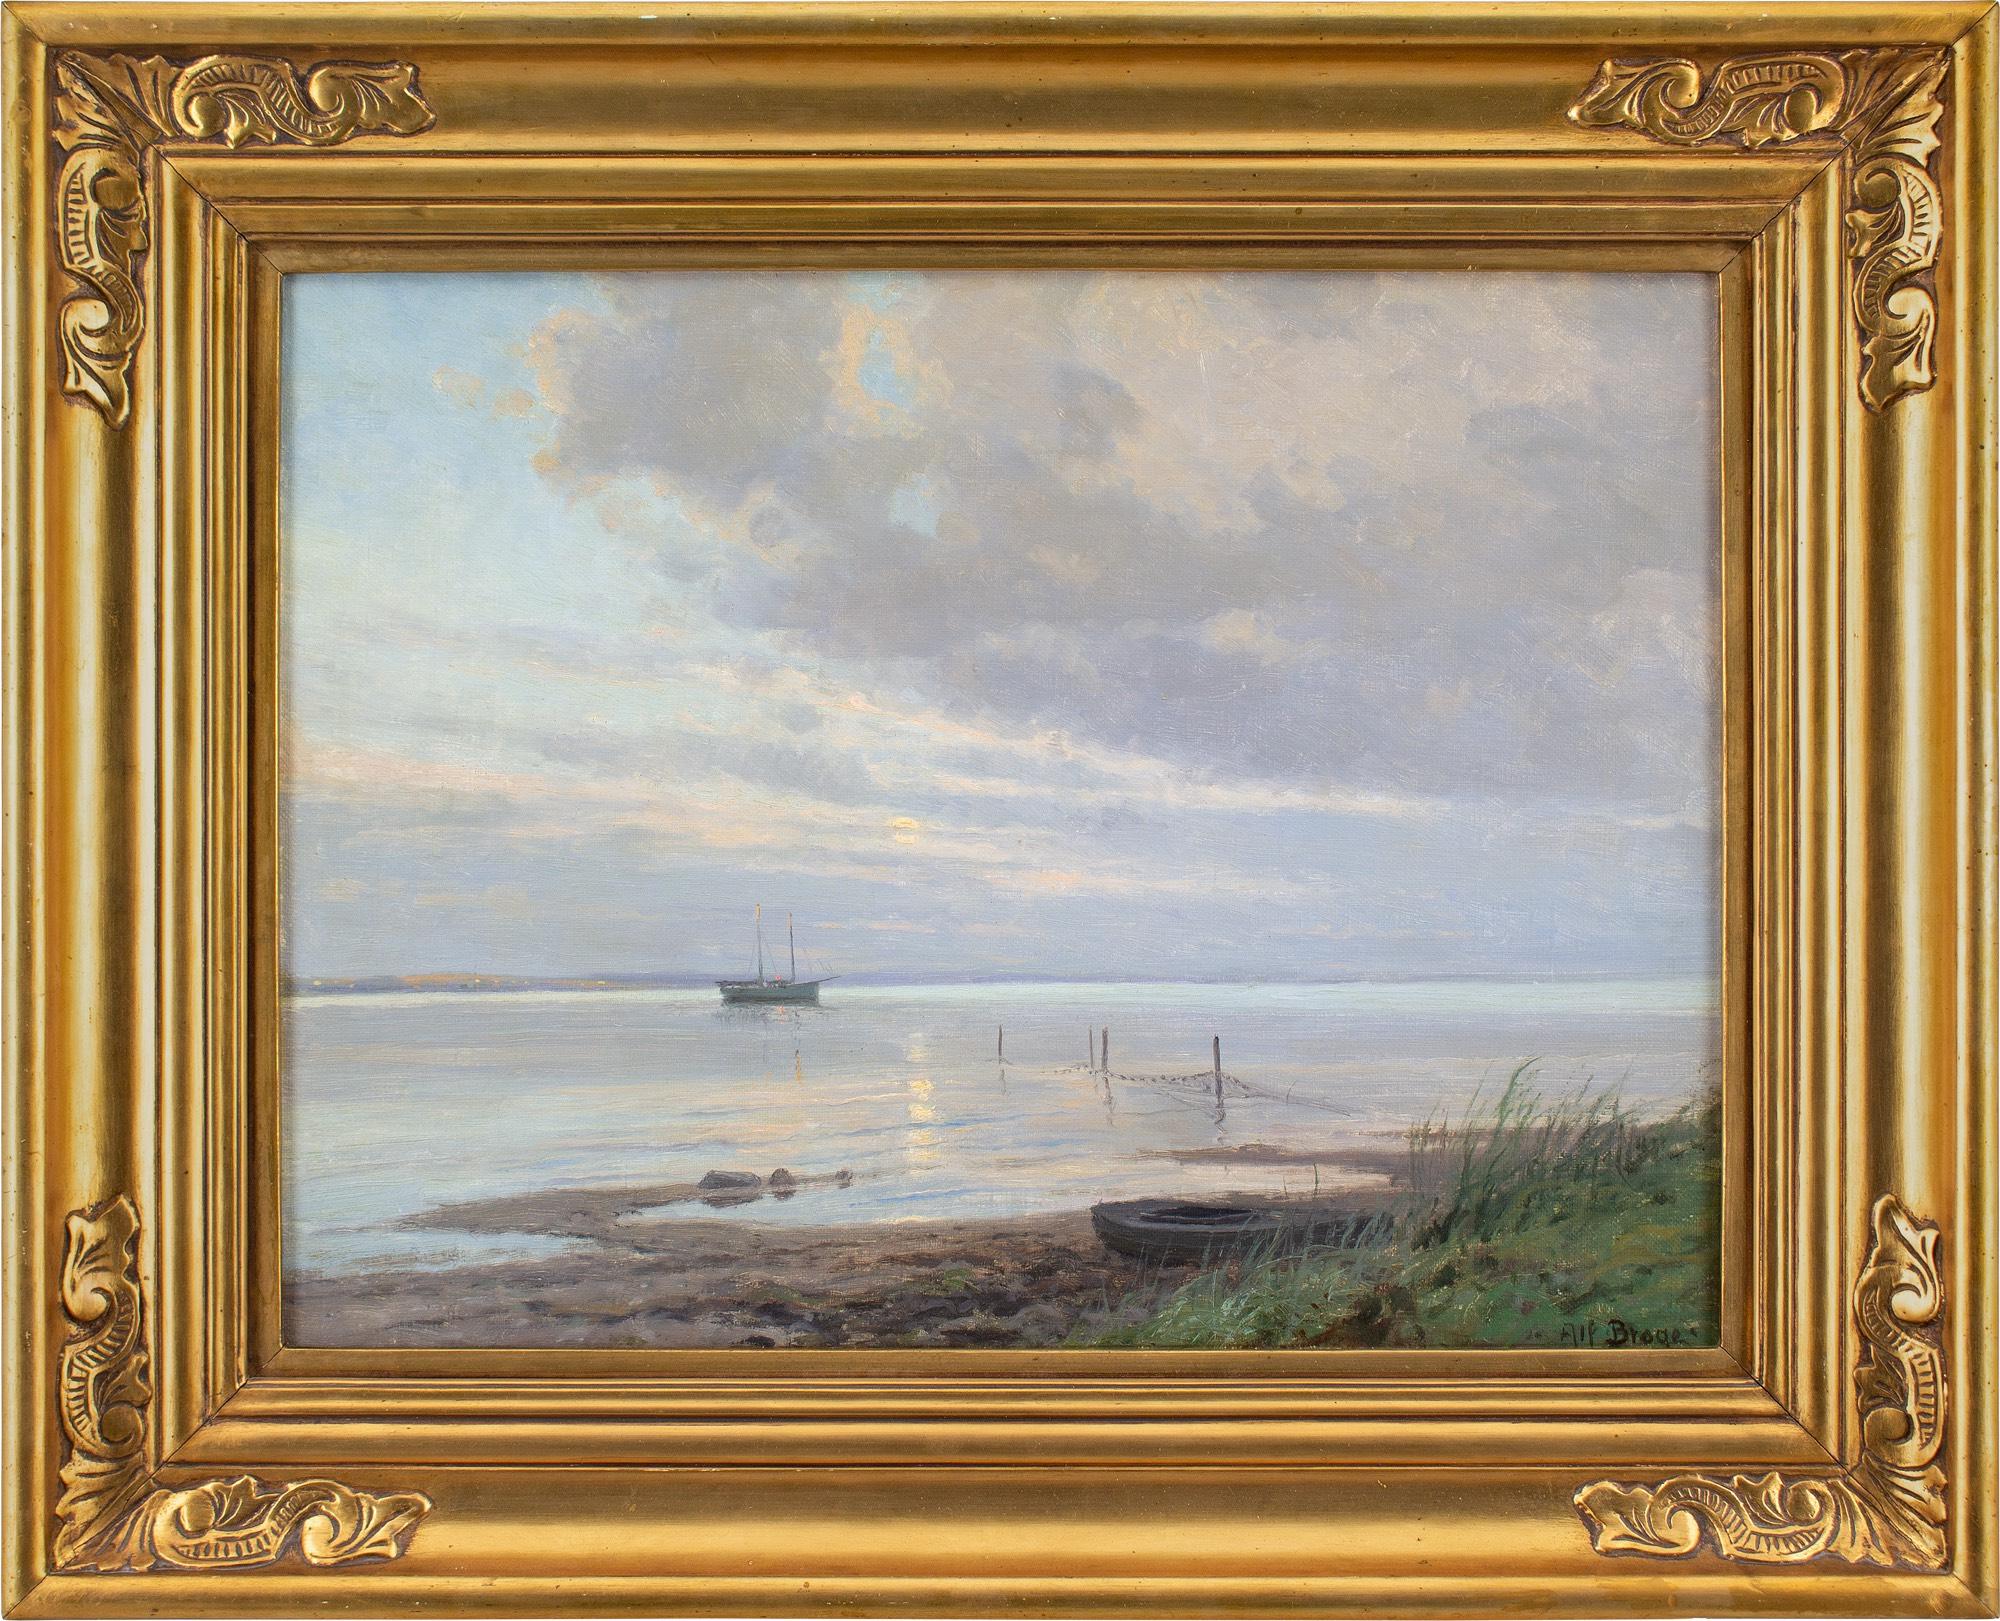 This early 20th-century oil painting by Danish artist Alfred Broge (1870-1955) depicts a gently-lit coastal view with boats. It’s a beautiful work with the setting sun, low in the sky, reflected in silvery waters.

Broge is predominantly known for